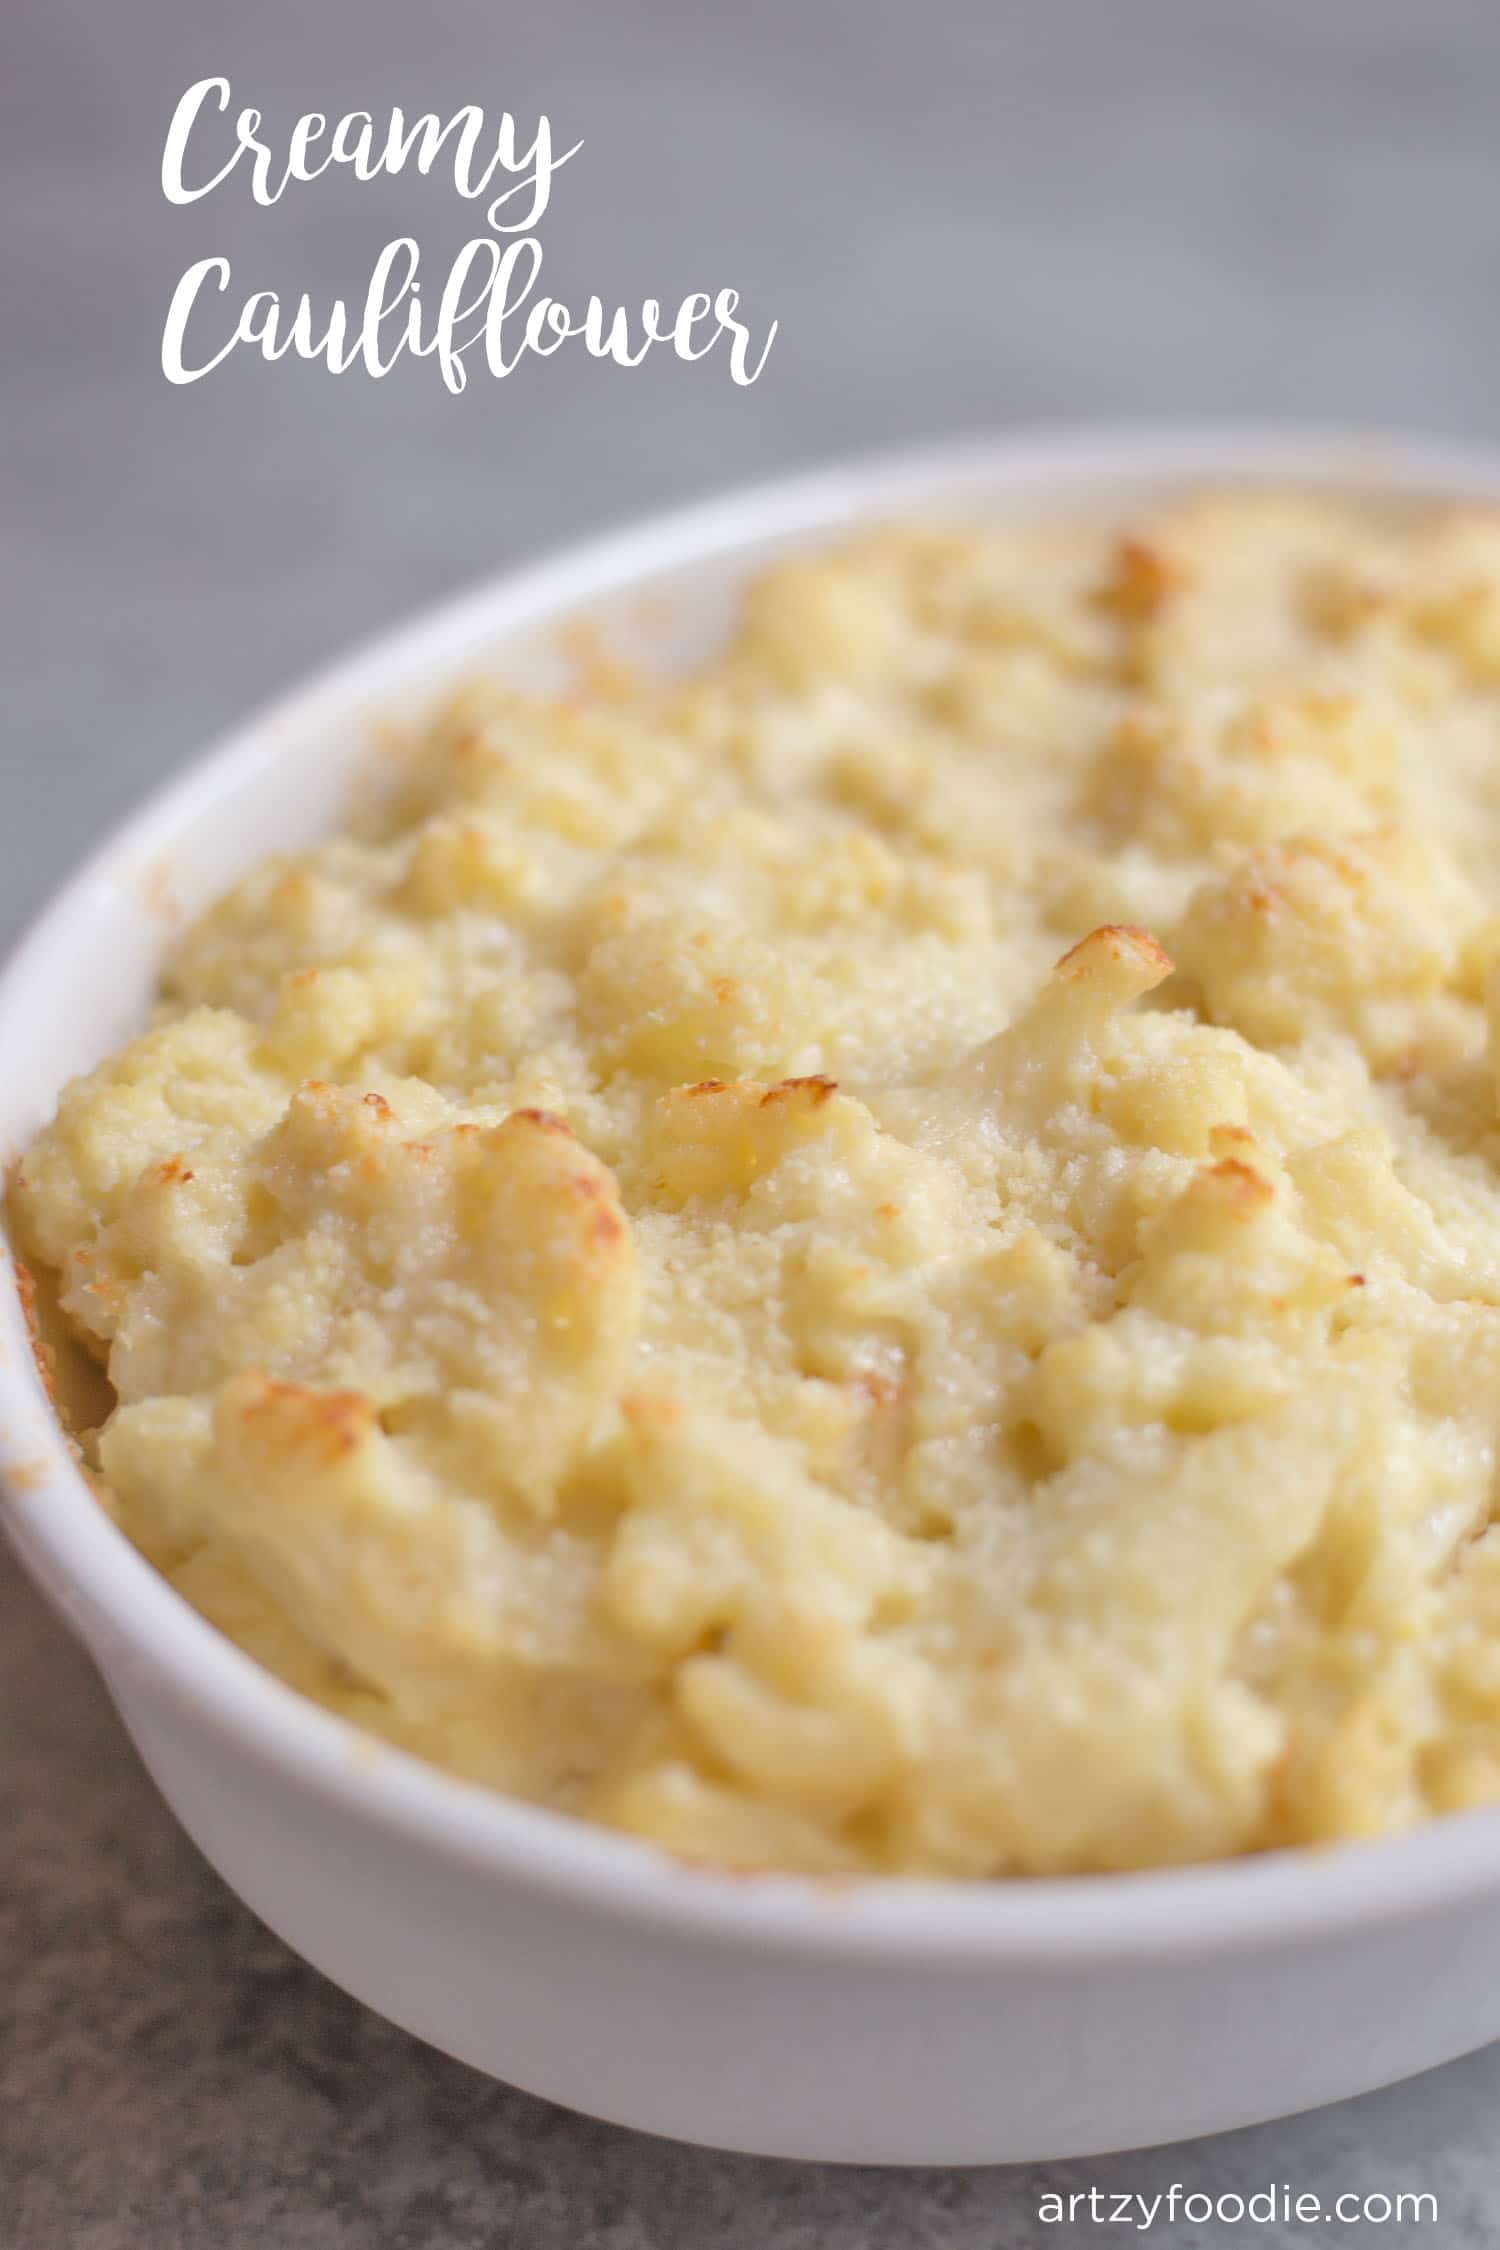 Creamy cauliflower is a great substitute for mashed potatoes! |artzyfoodie.com|